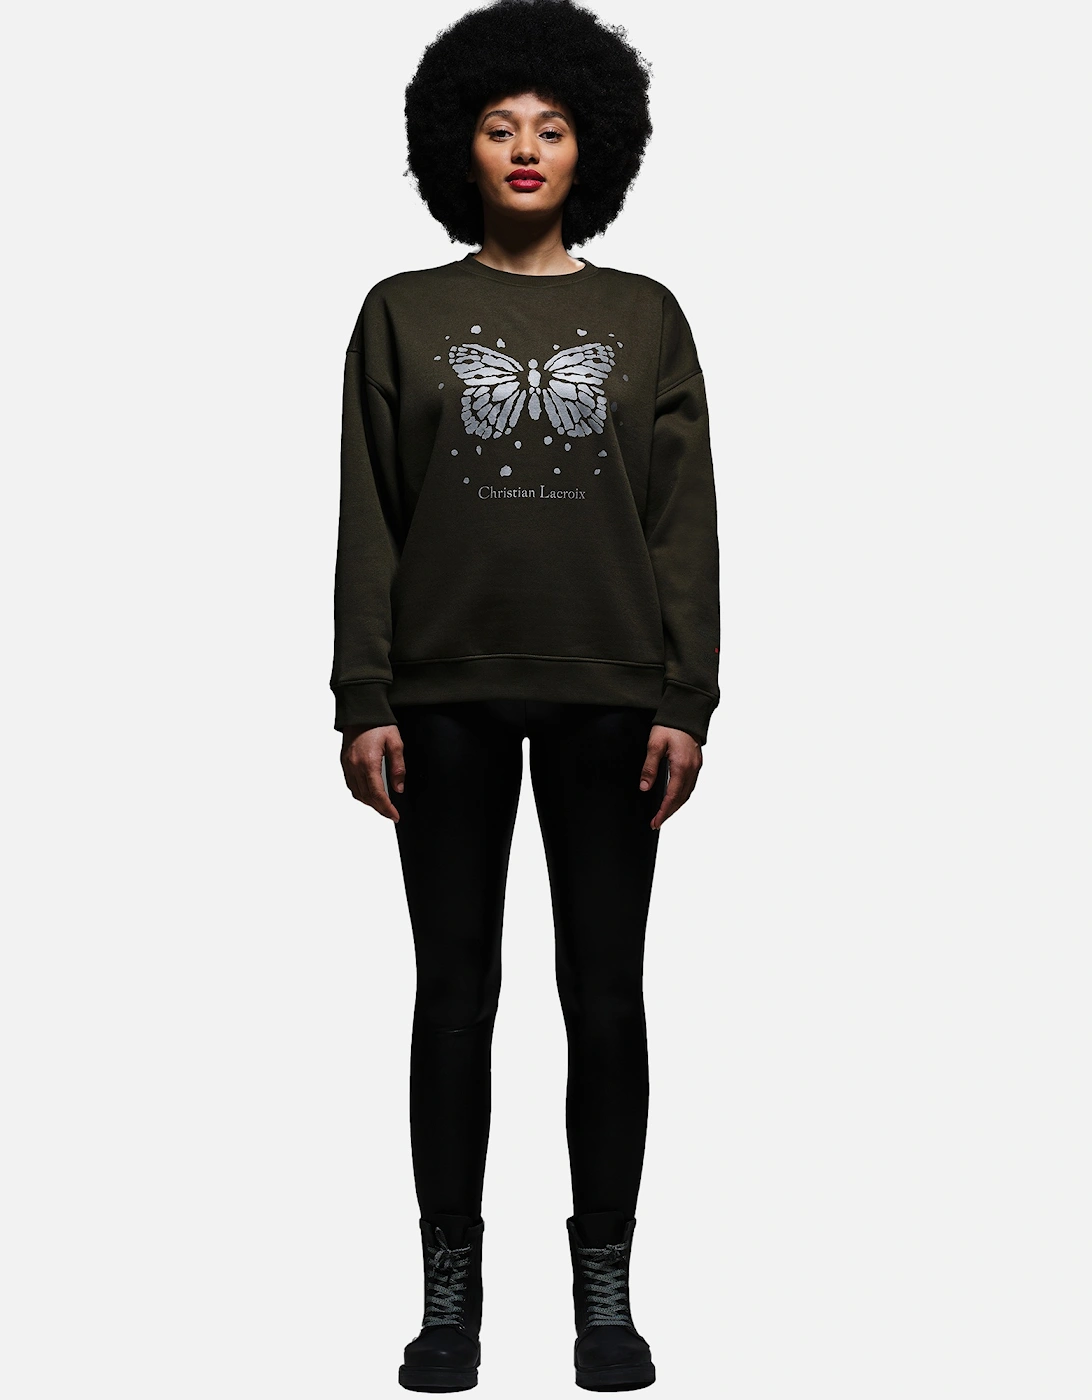 Womens/Ladies Christian Lacroix Beauvision Butterfly Sweatshirt